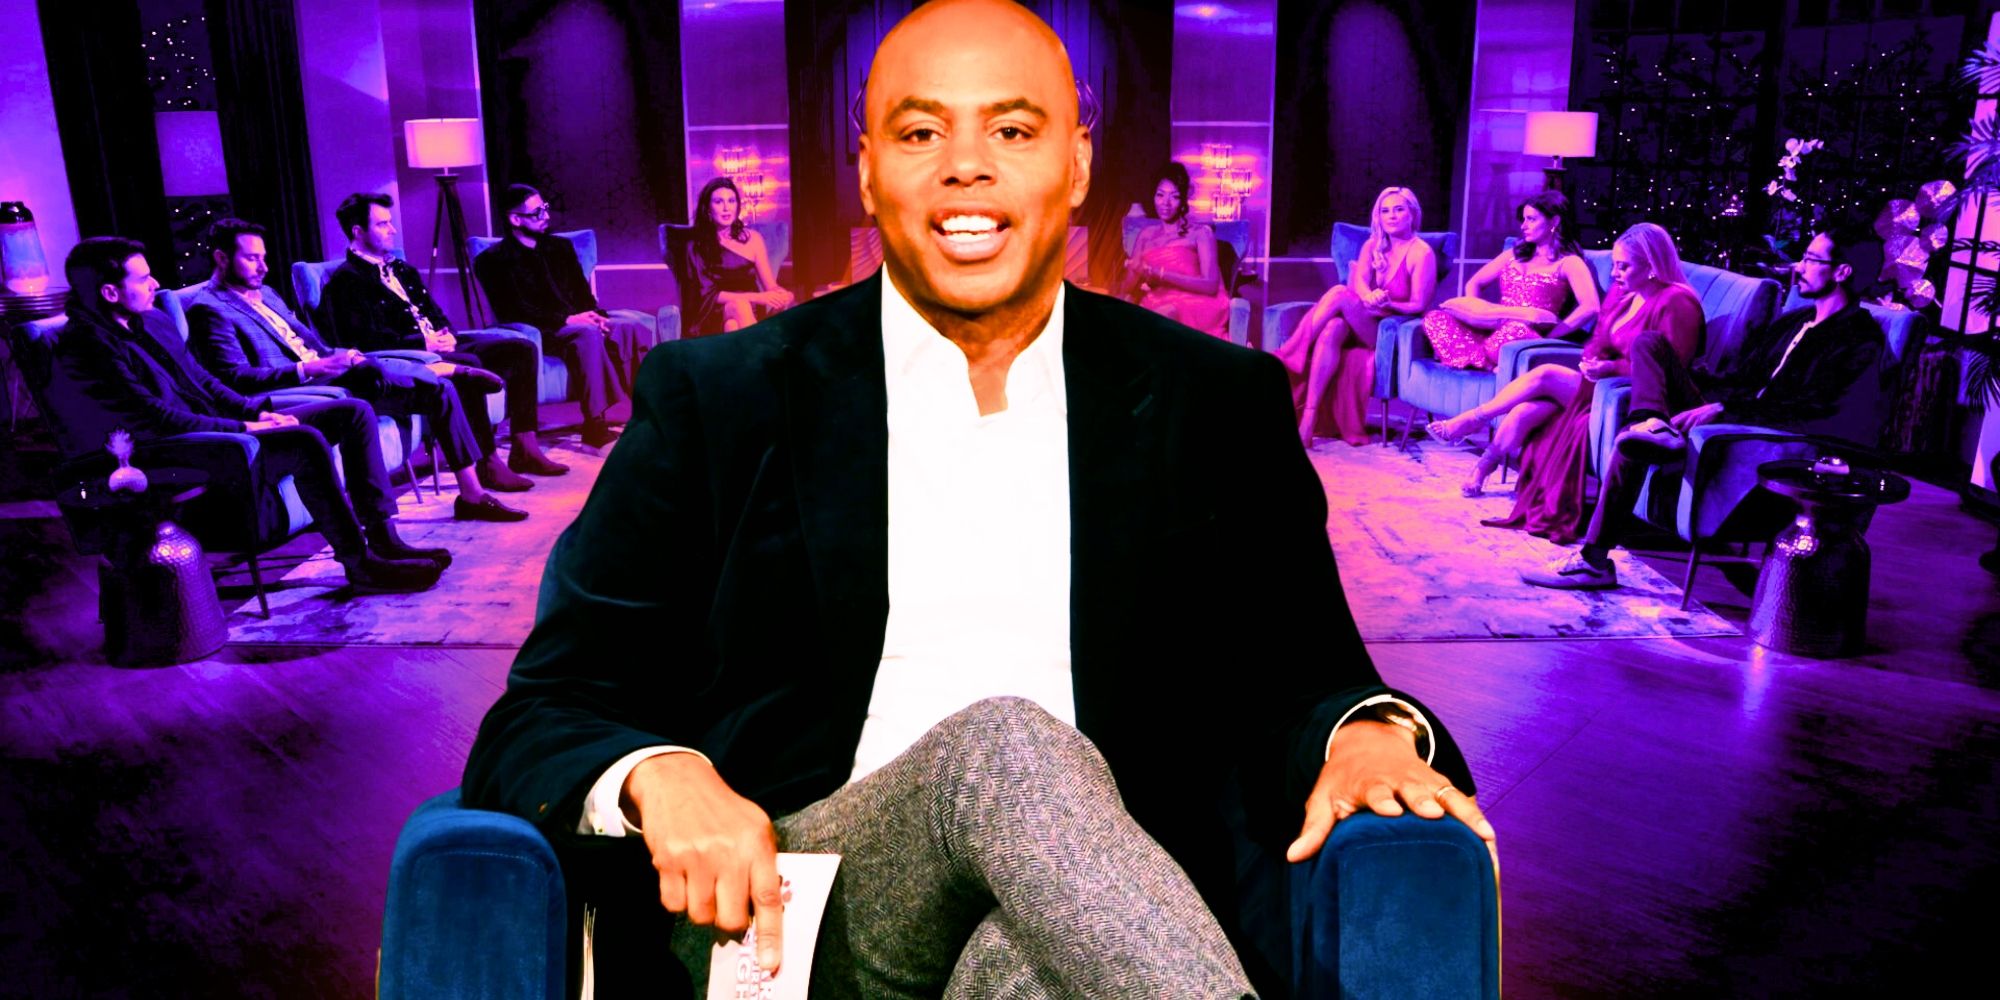 Married at First Sight Reunion Host Kevin Frazier with season 17 cast in background from the Reunion